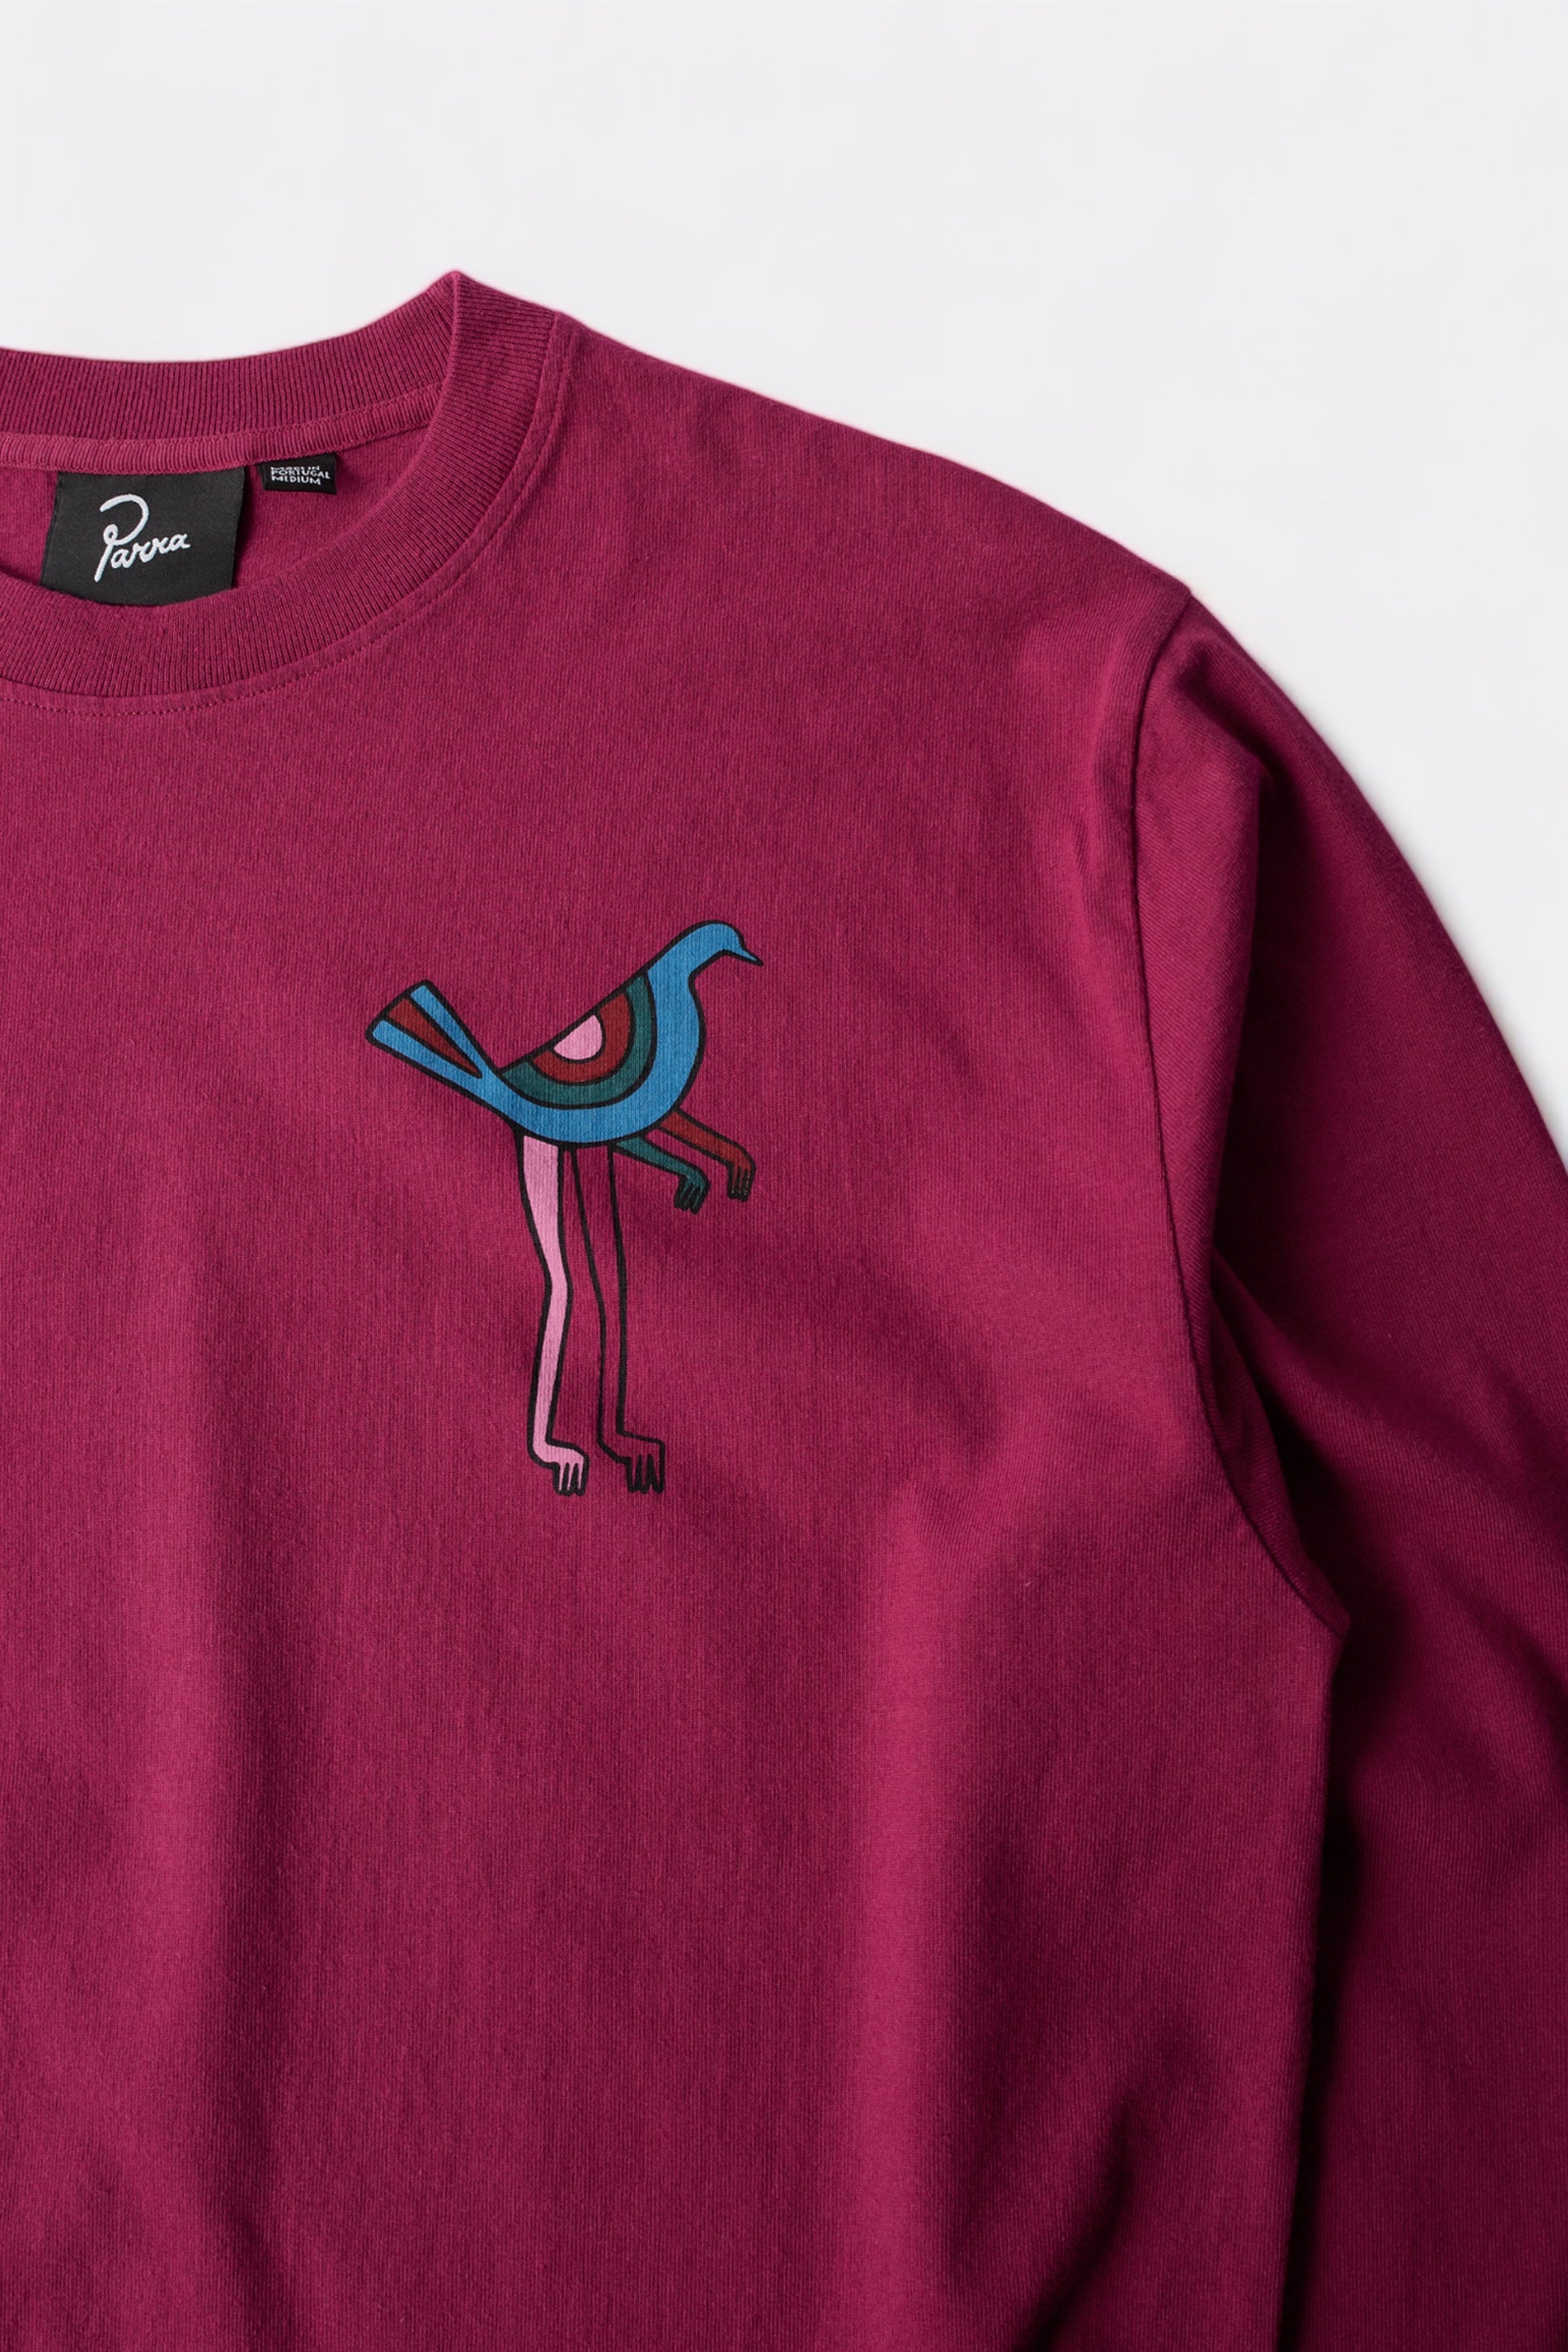 Parra - Wine And Books Long Sleeve T-Shirt (Beet Red)